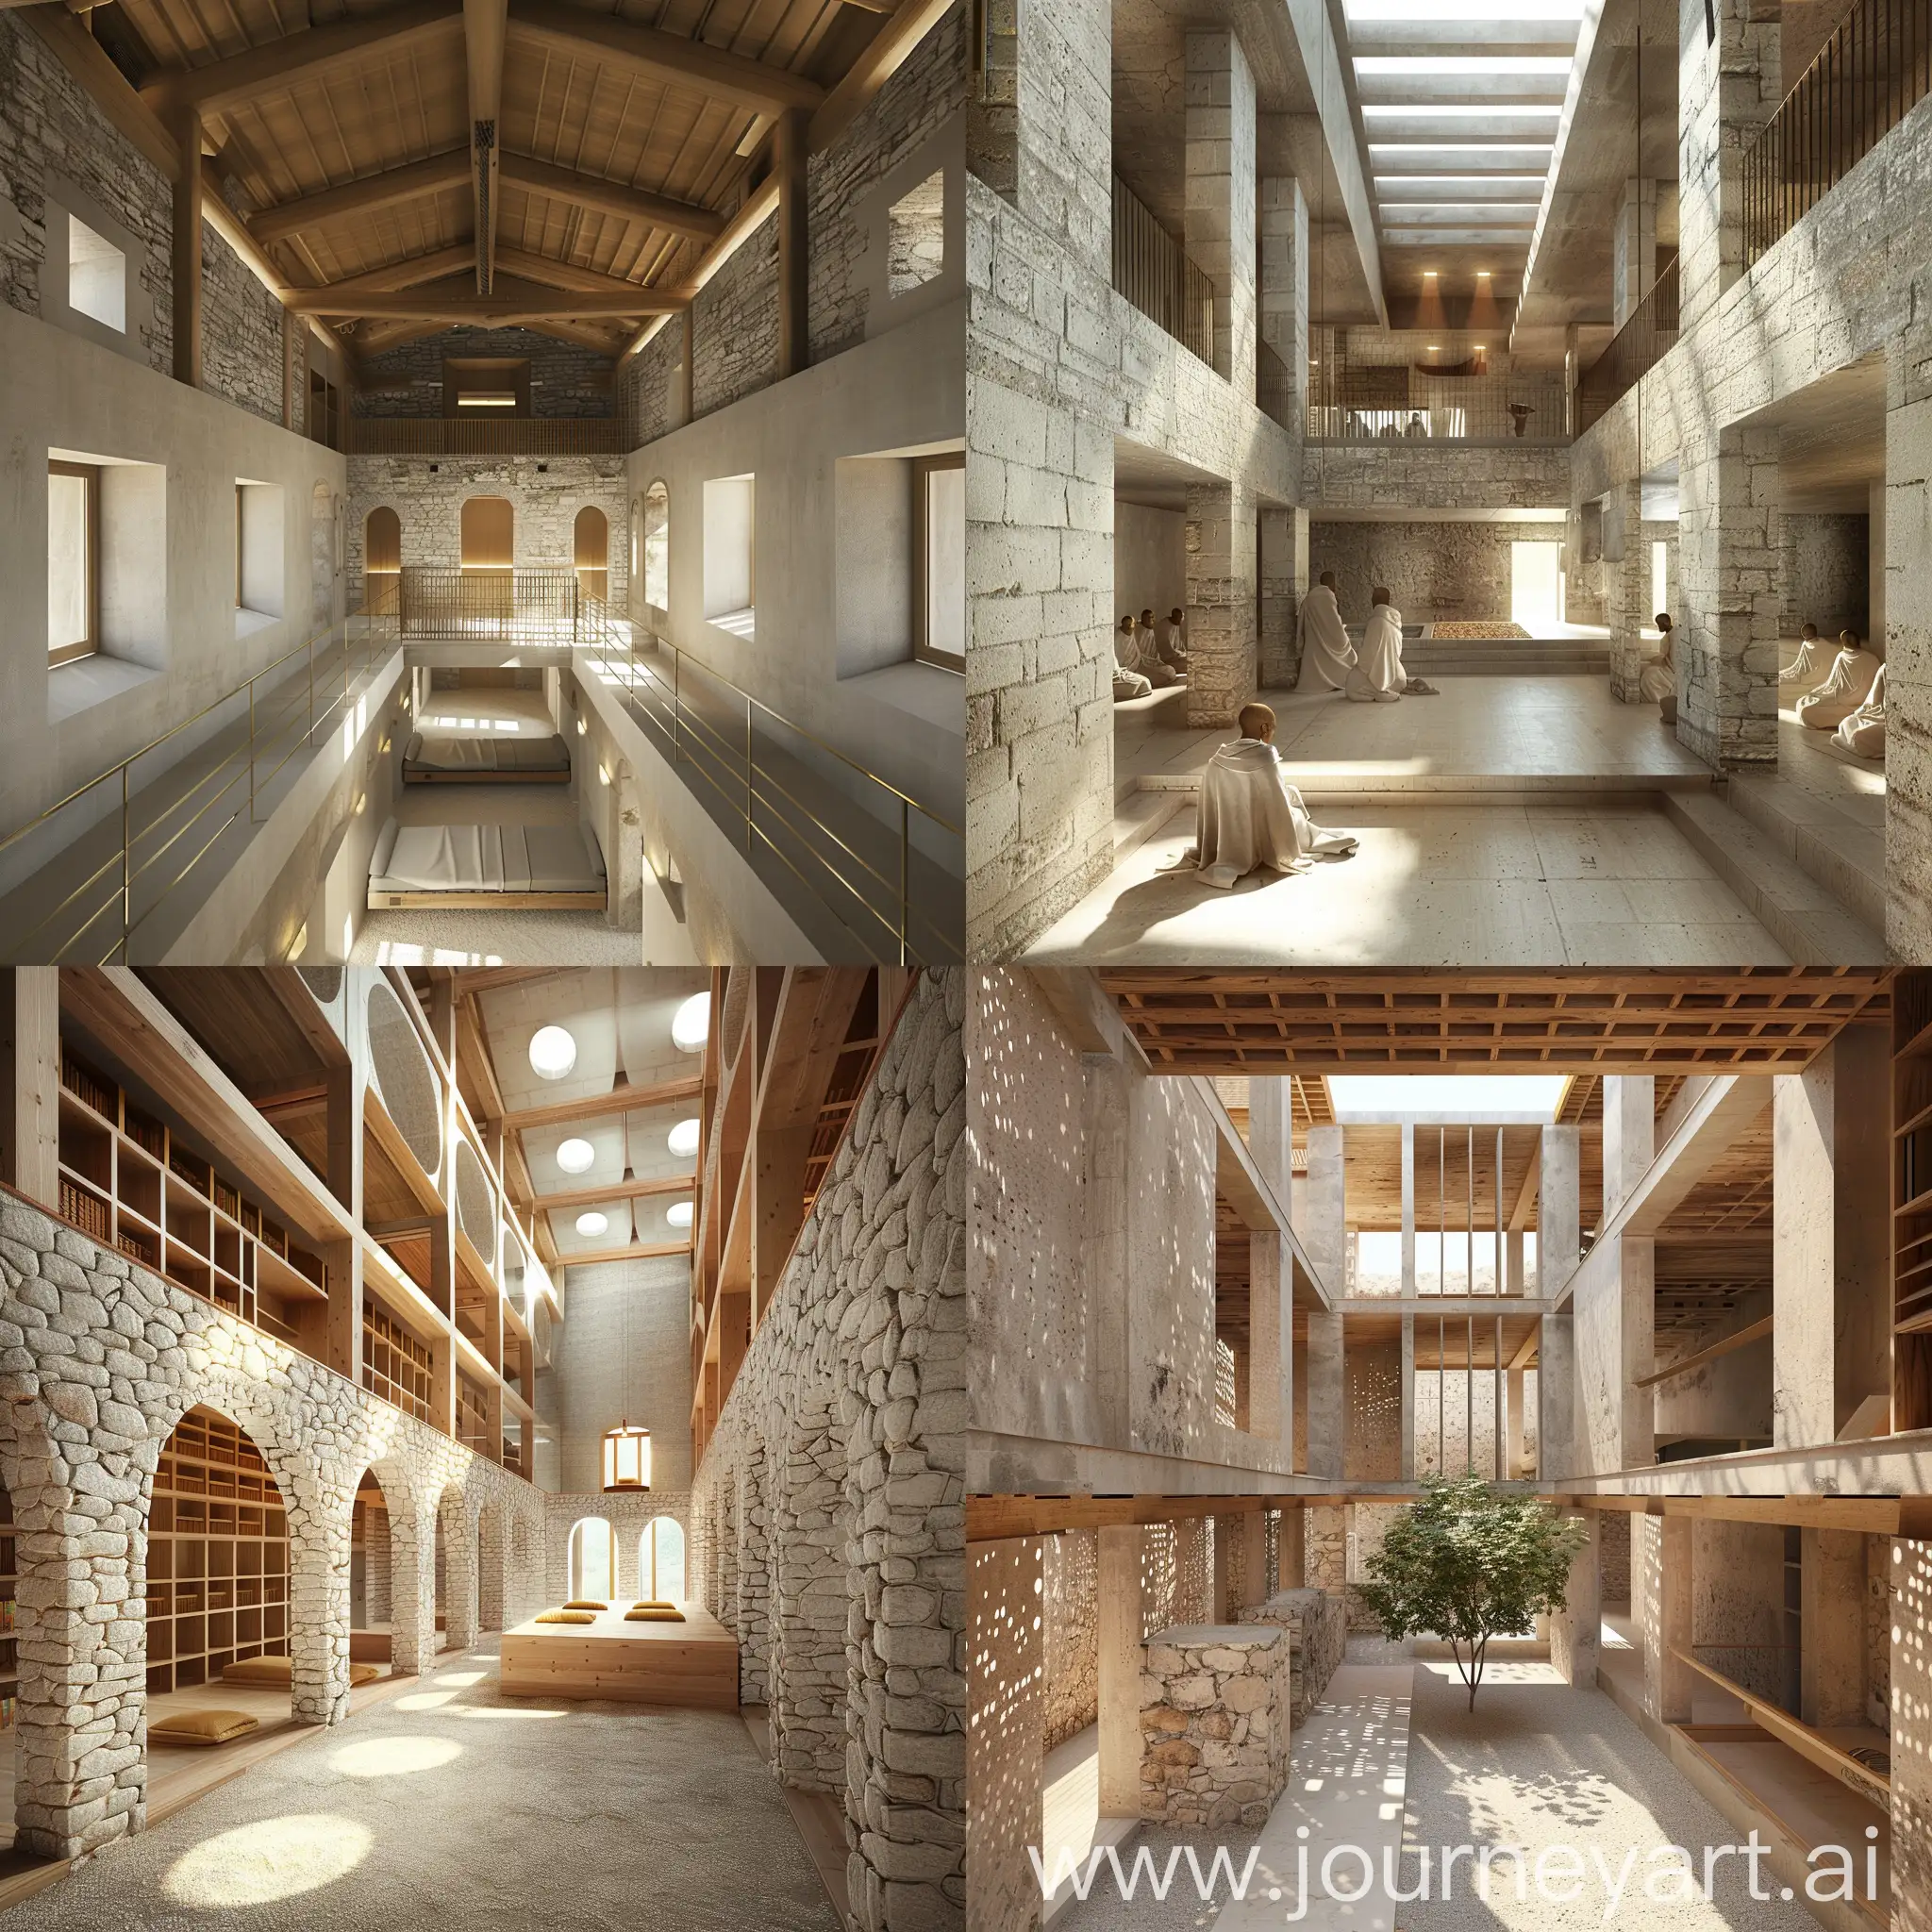 House of culture with cells for monks 2 floors. The building material is stone and wood. Lots of light openings. 